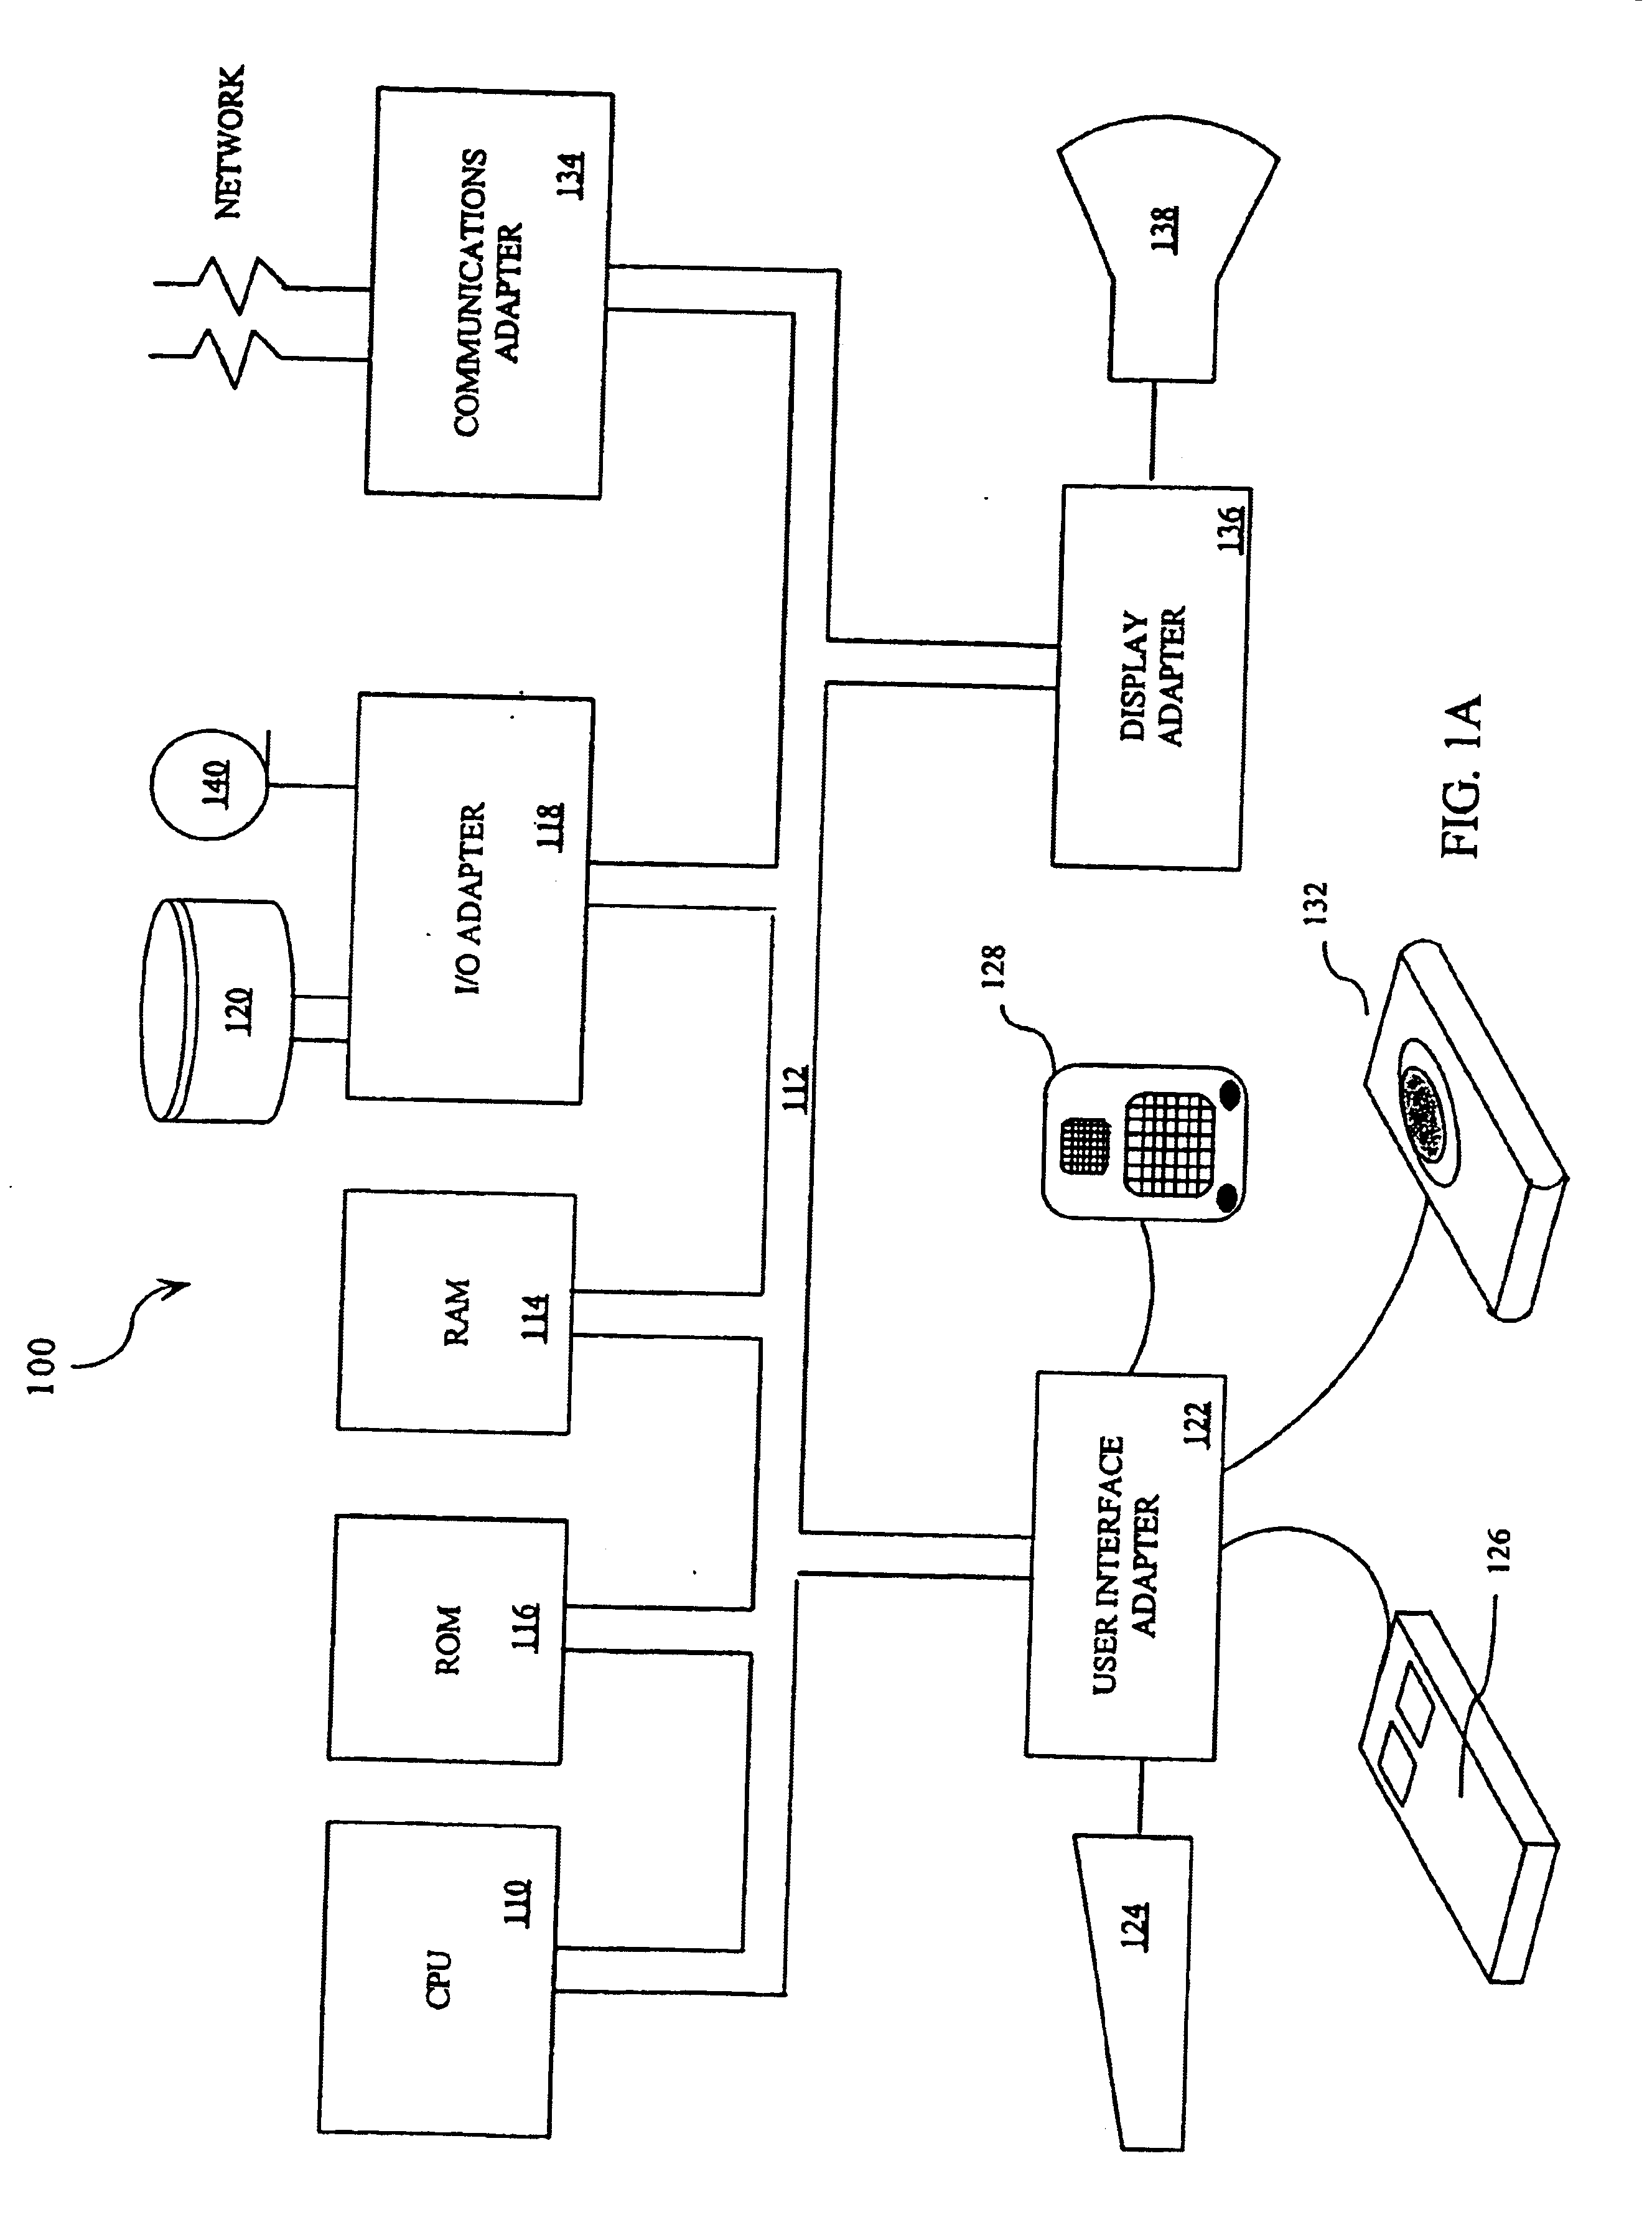 Circuits and methods for recovering link stack data upon branch instruction mis-speculation